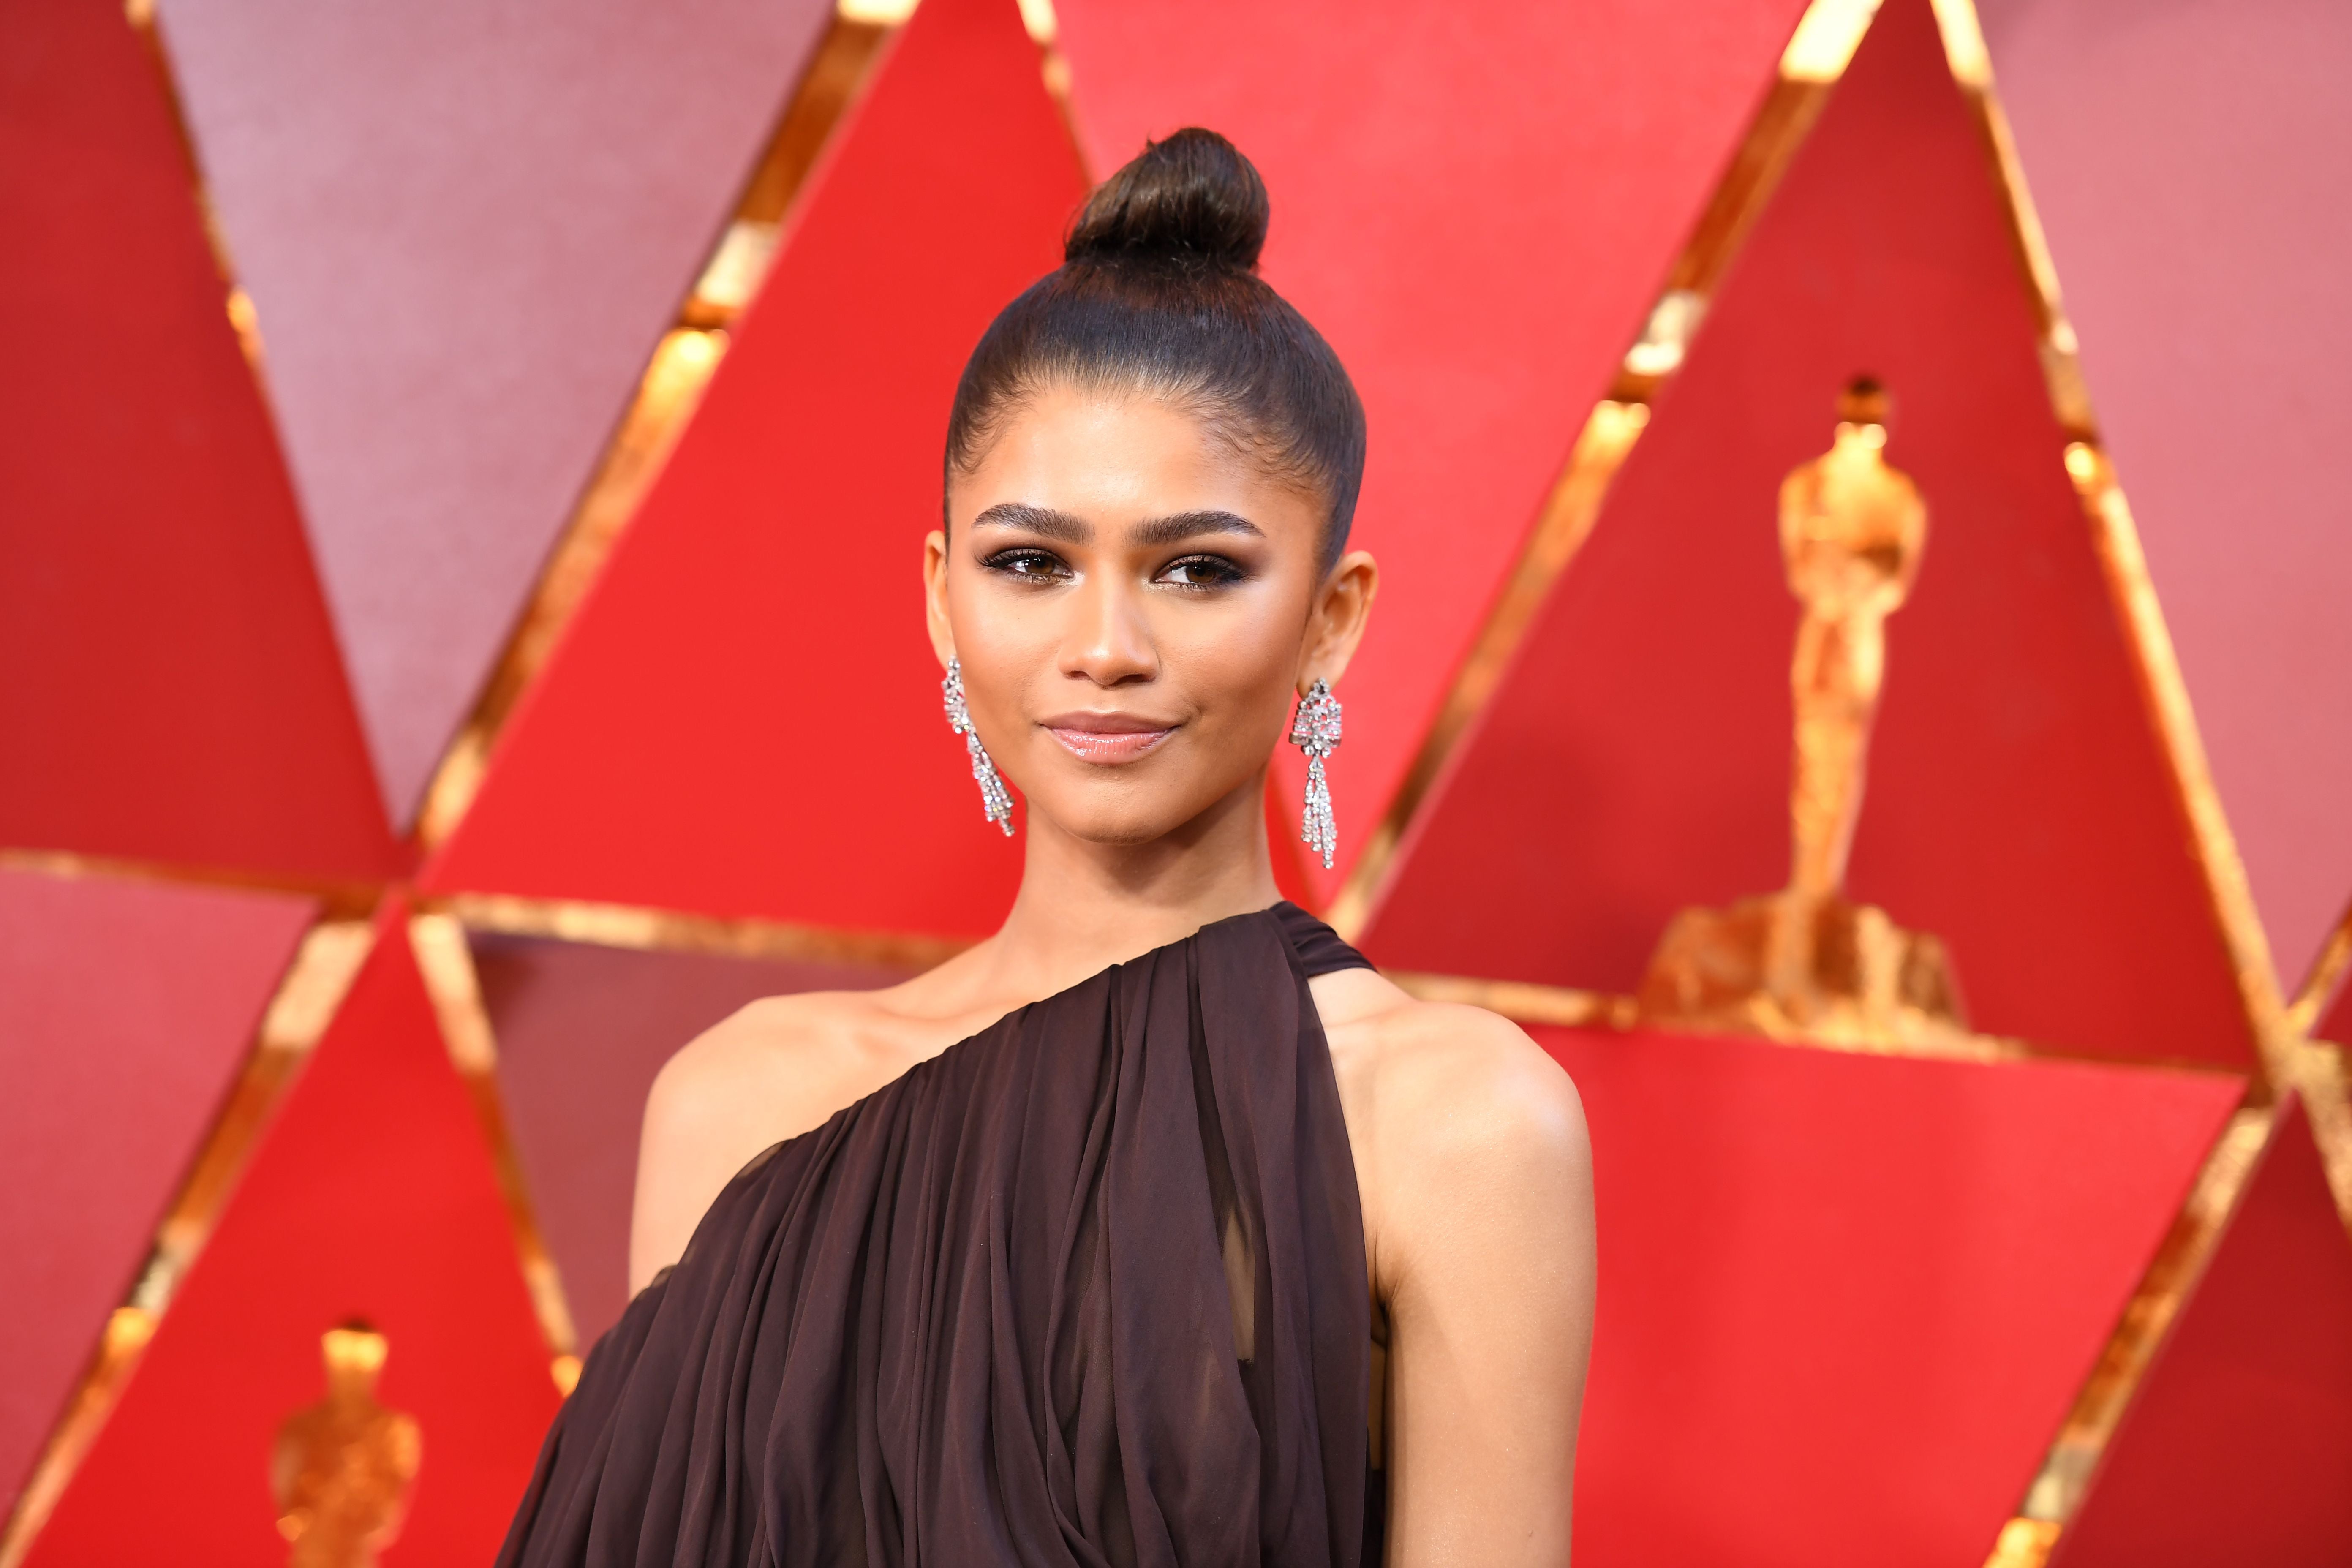 Zendaya opens up about going to therapy